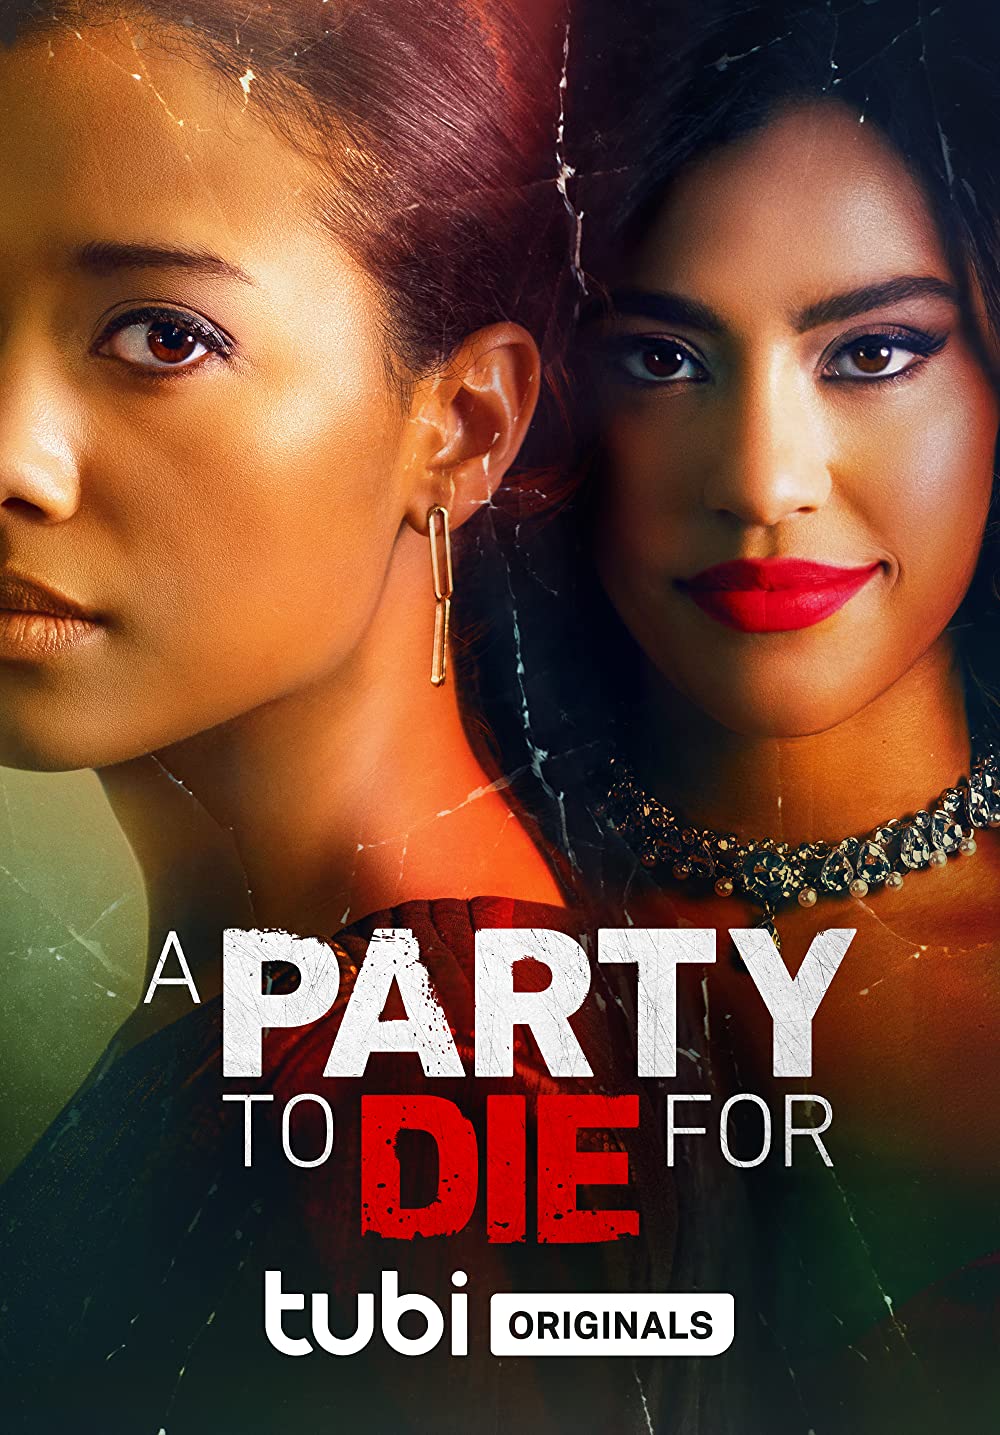 A Party To Die For 2022 English Movie 720p HDRip ESub 850MB Download